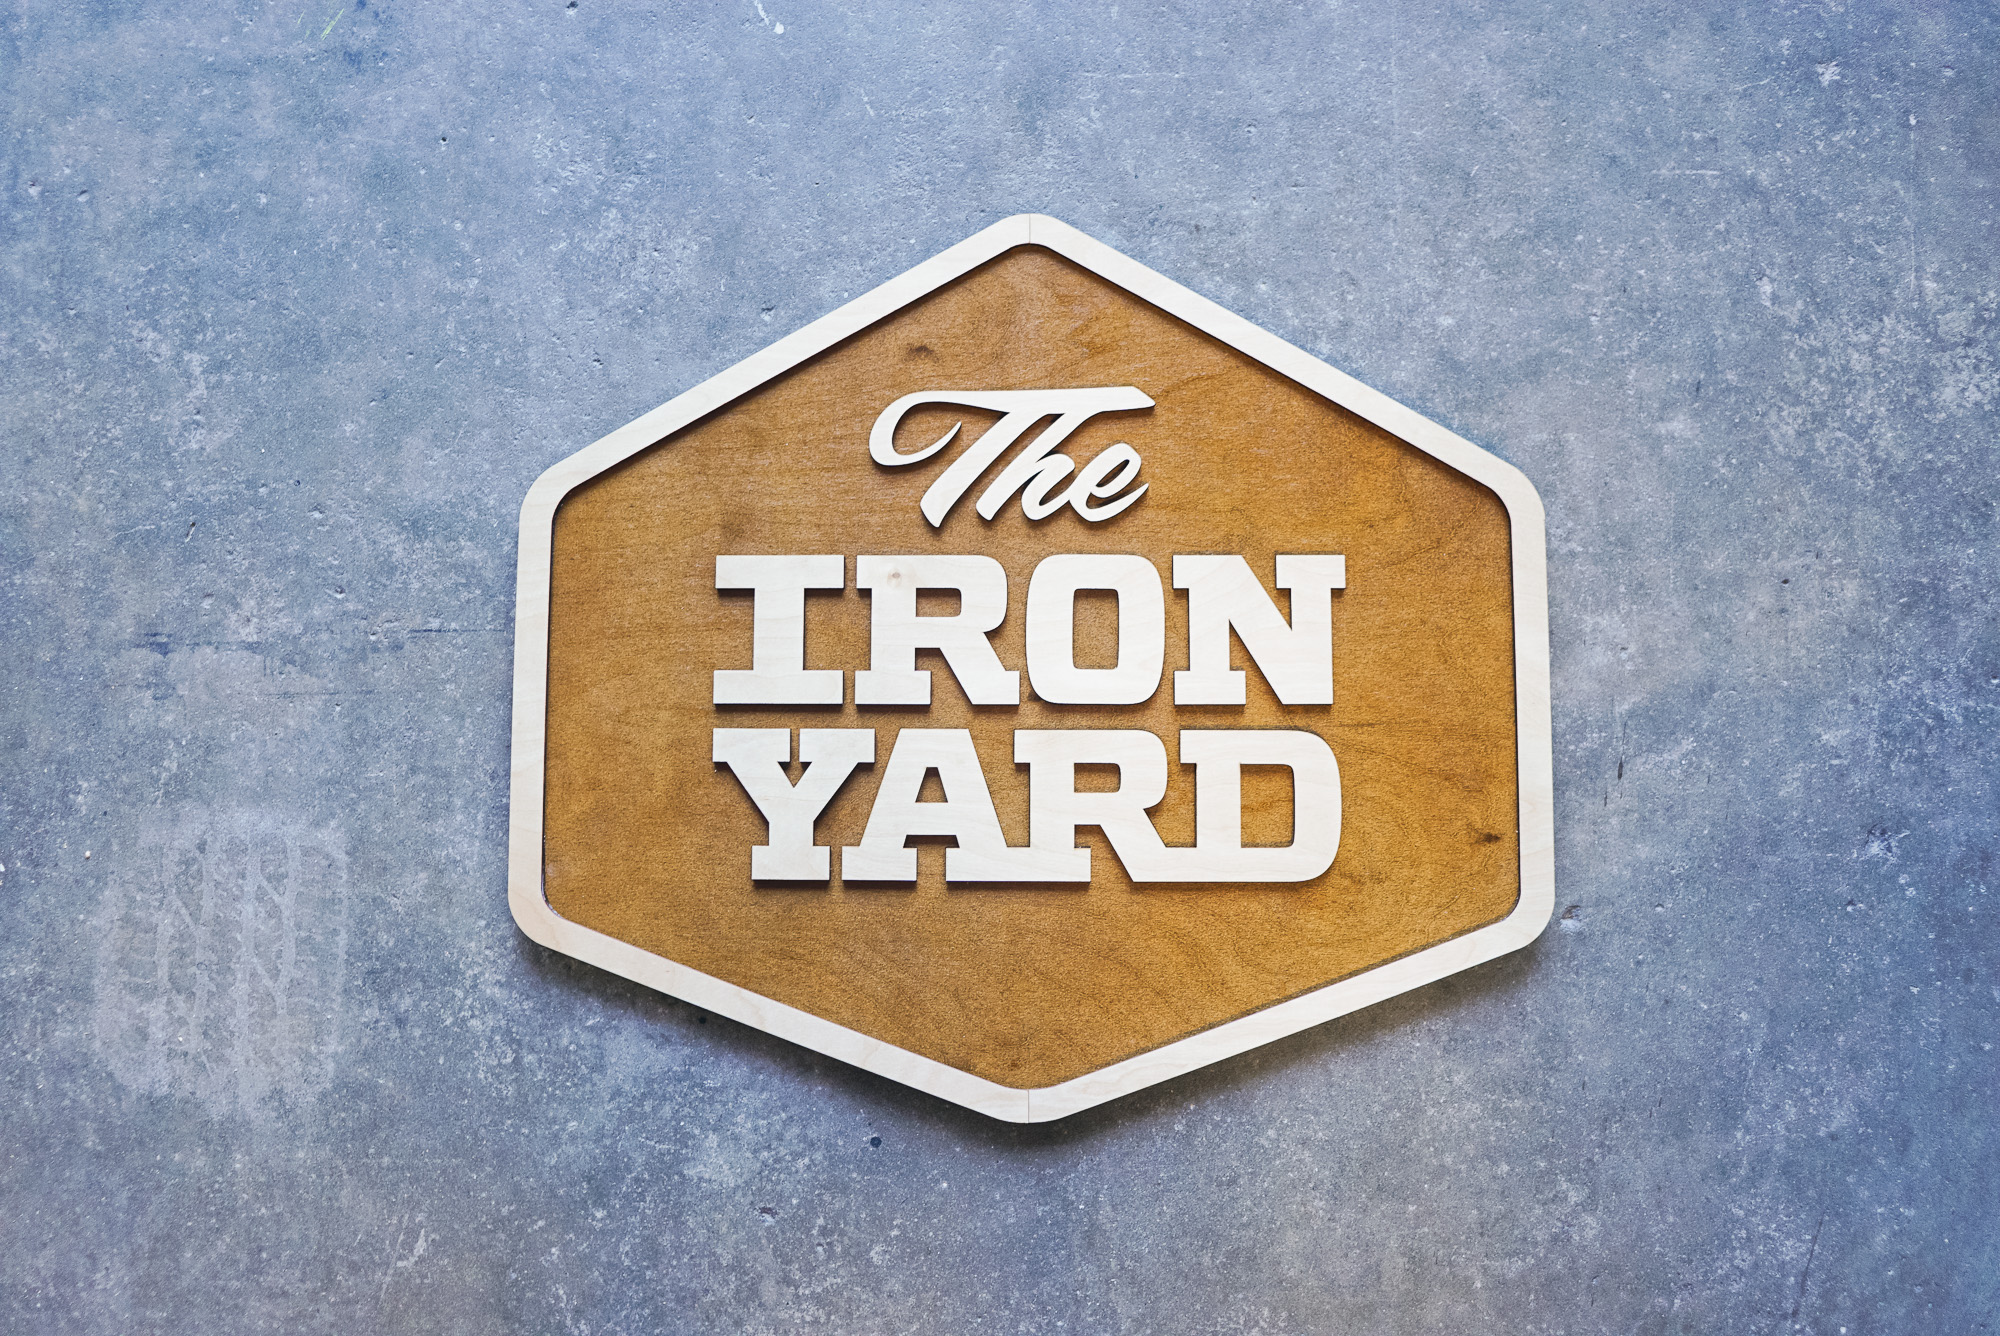 Raised two-toned wood sign for The Iron Yard, a 12-week coding school offered in multiple cities across the US and in London.